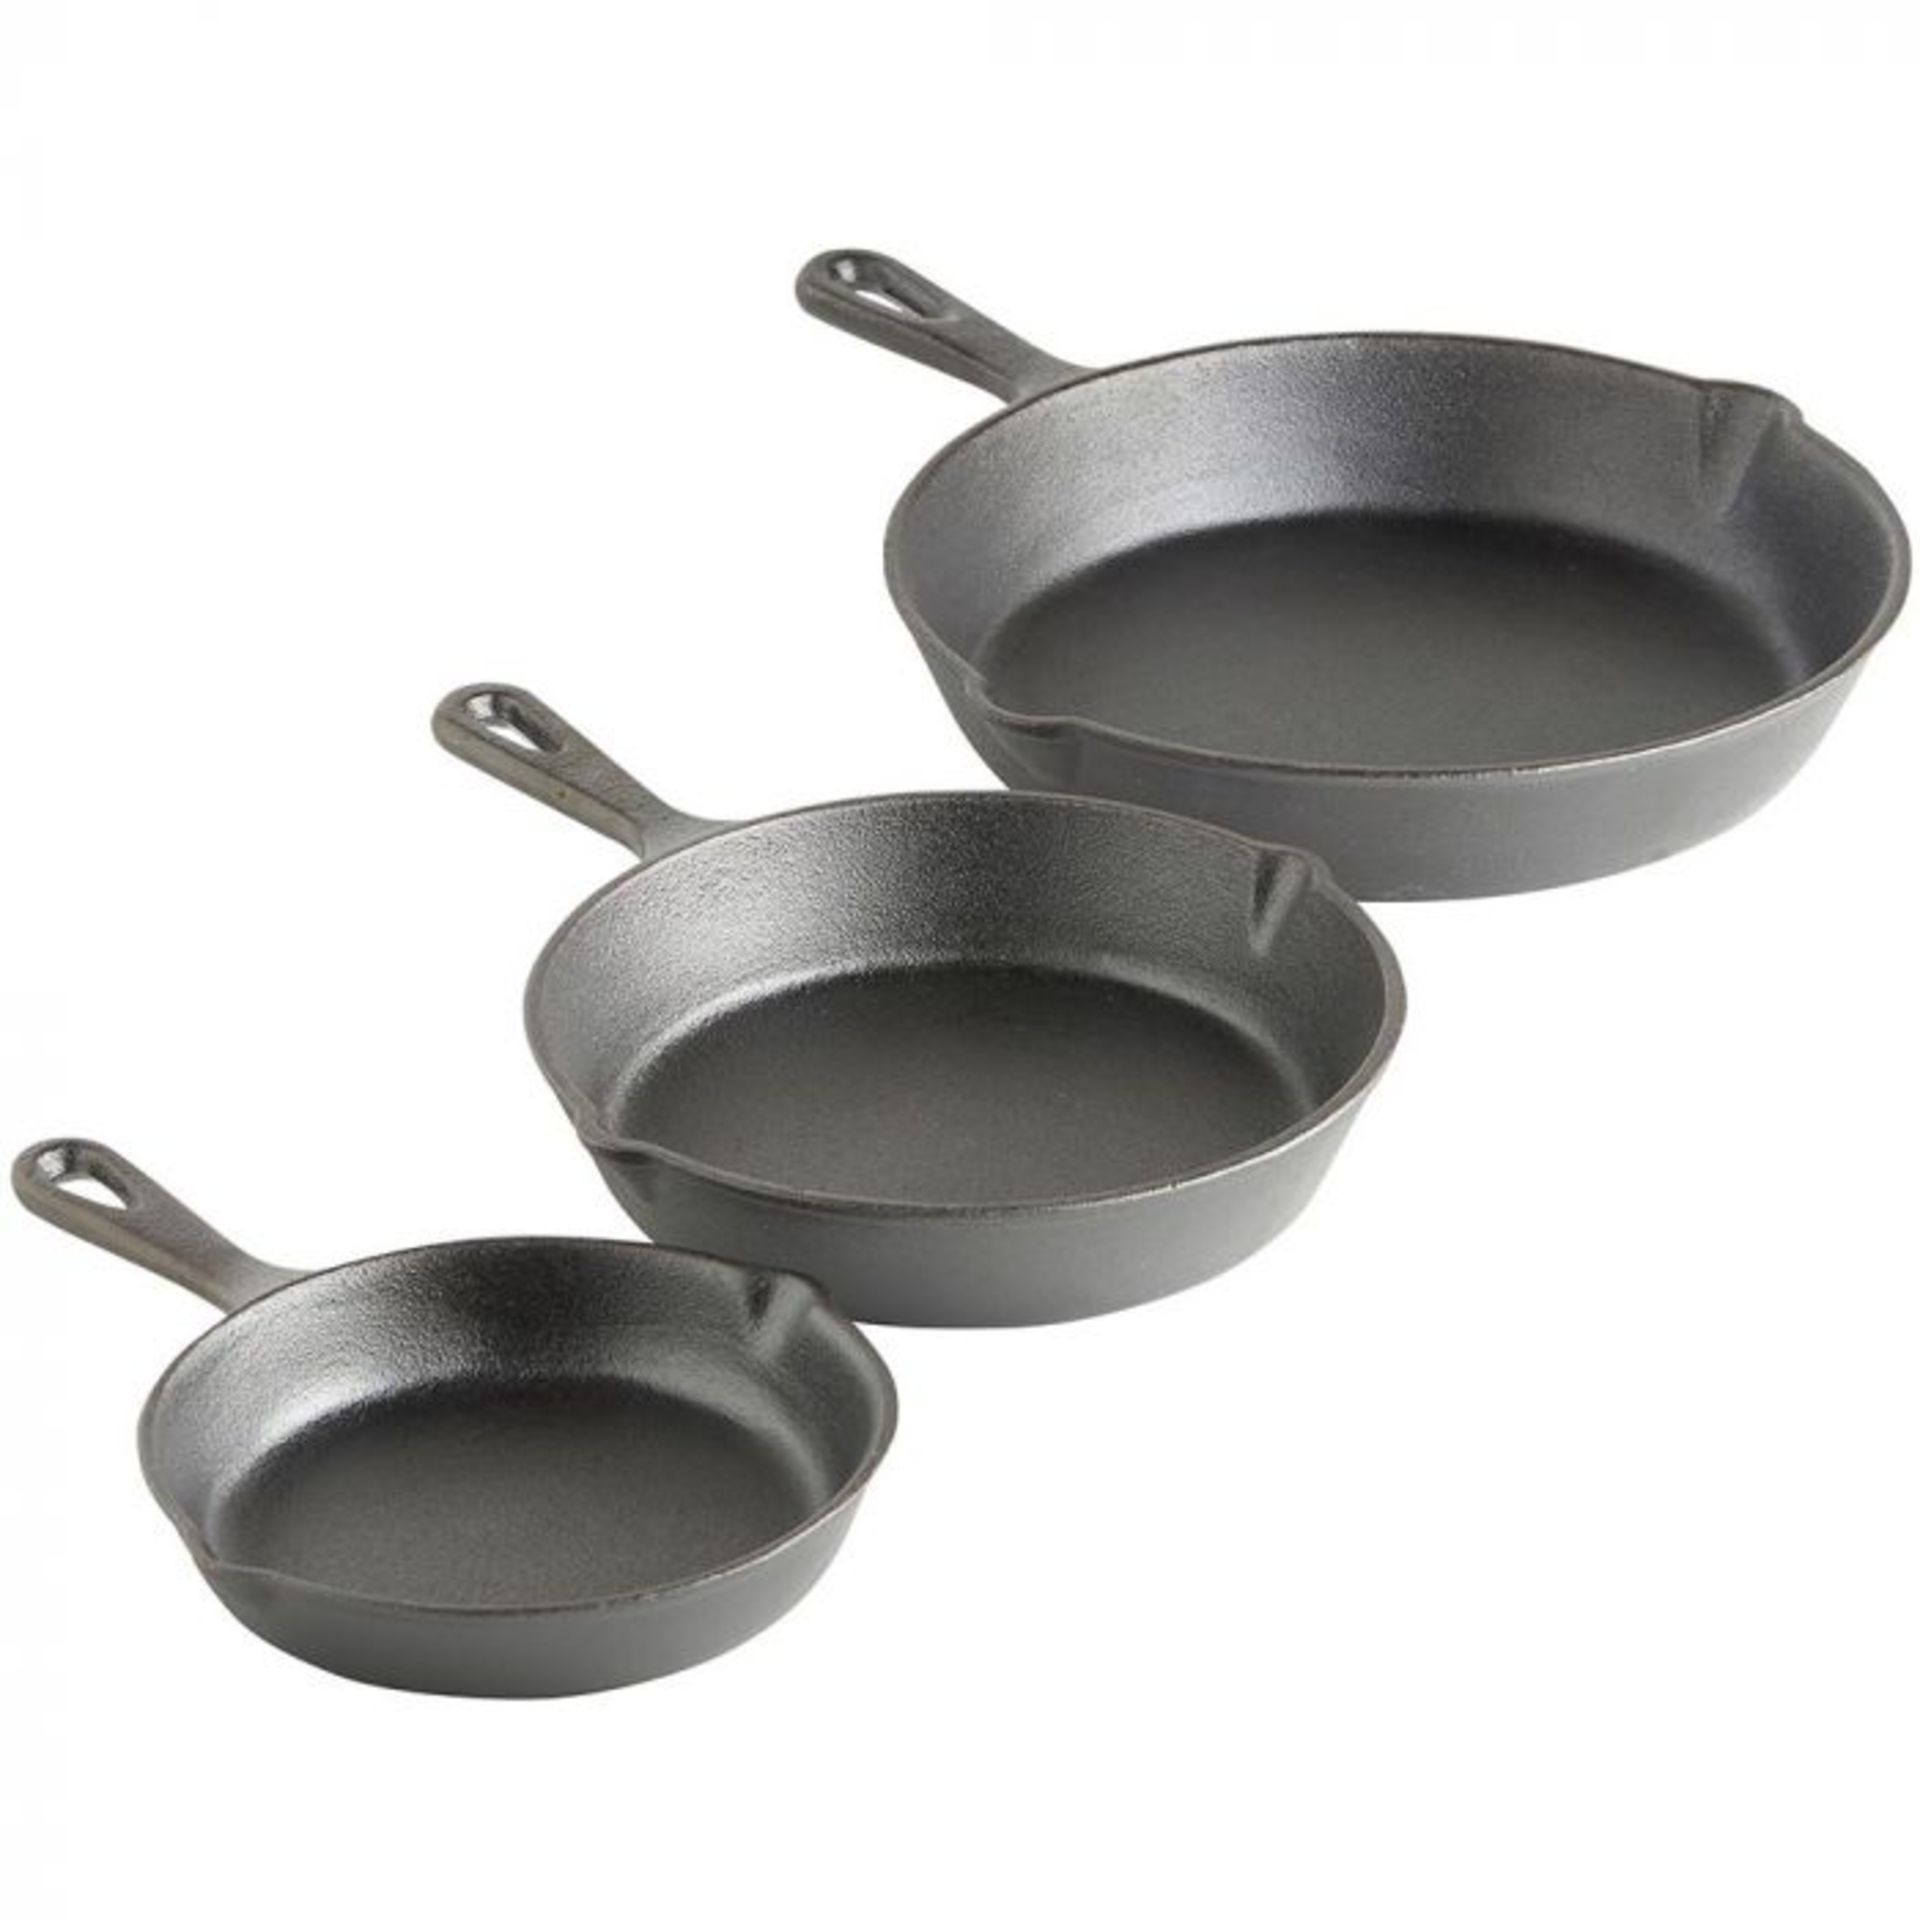 (V73) 3pc Cast Iron Skillet Set Traditional cast iron construction, Pre-seasoned with natural ... - Image 4 of 4